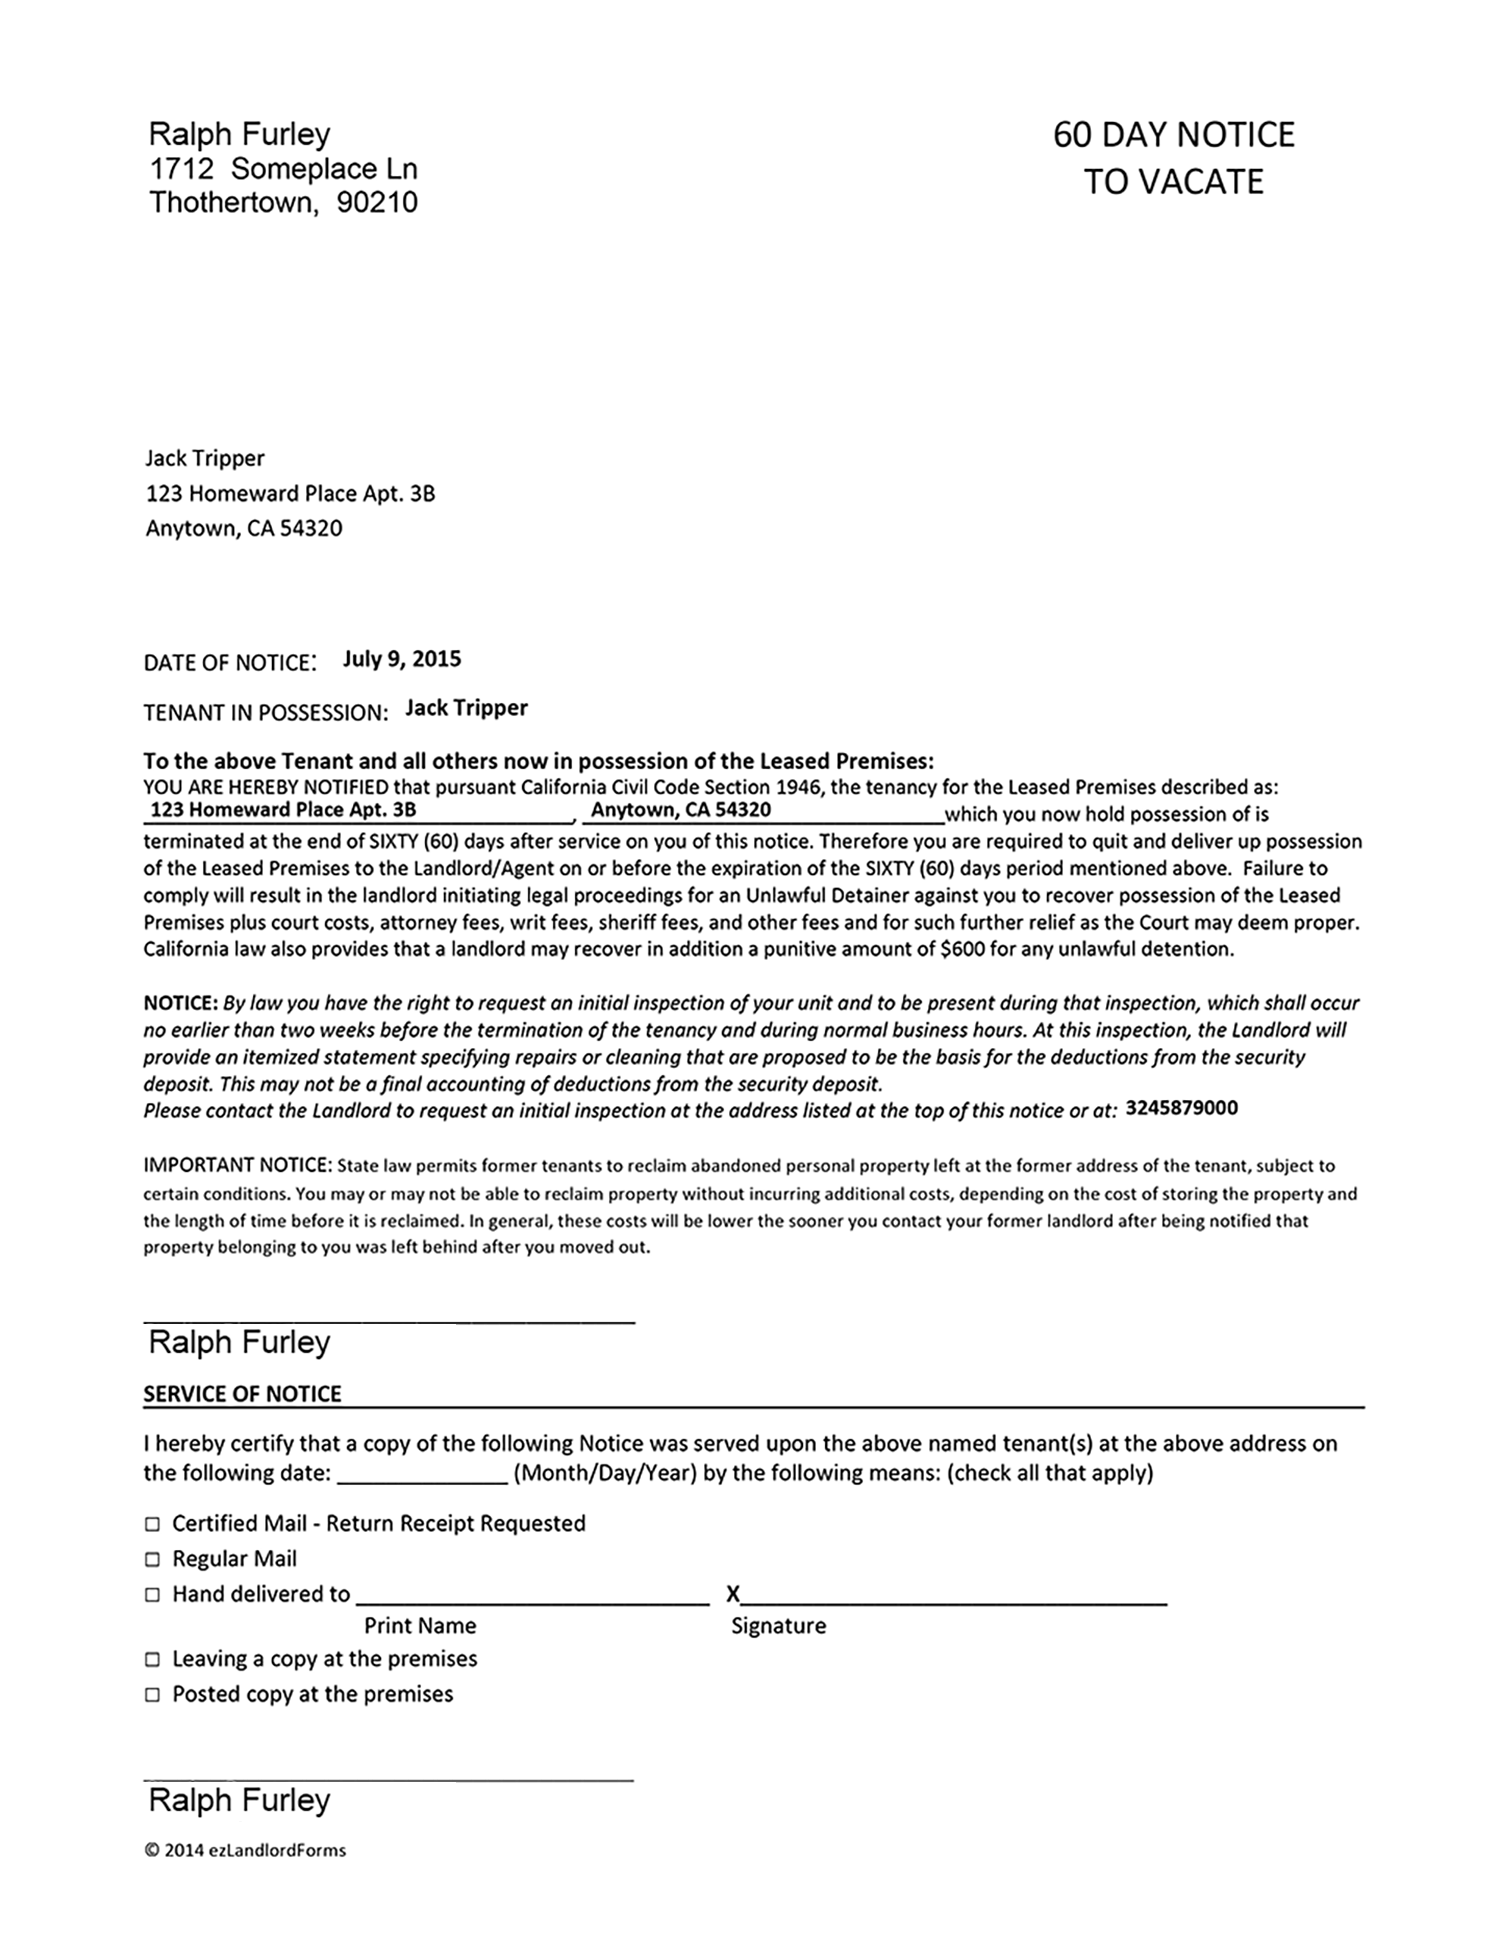 30 Day Demand Letter from www.ezlandlordforms.com